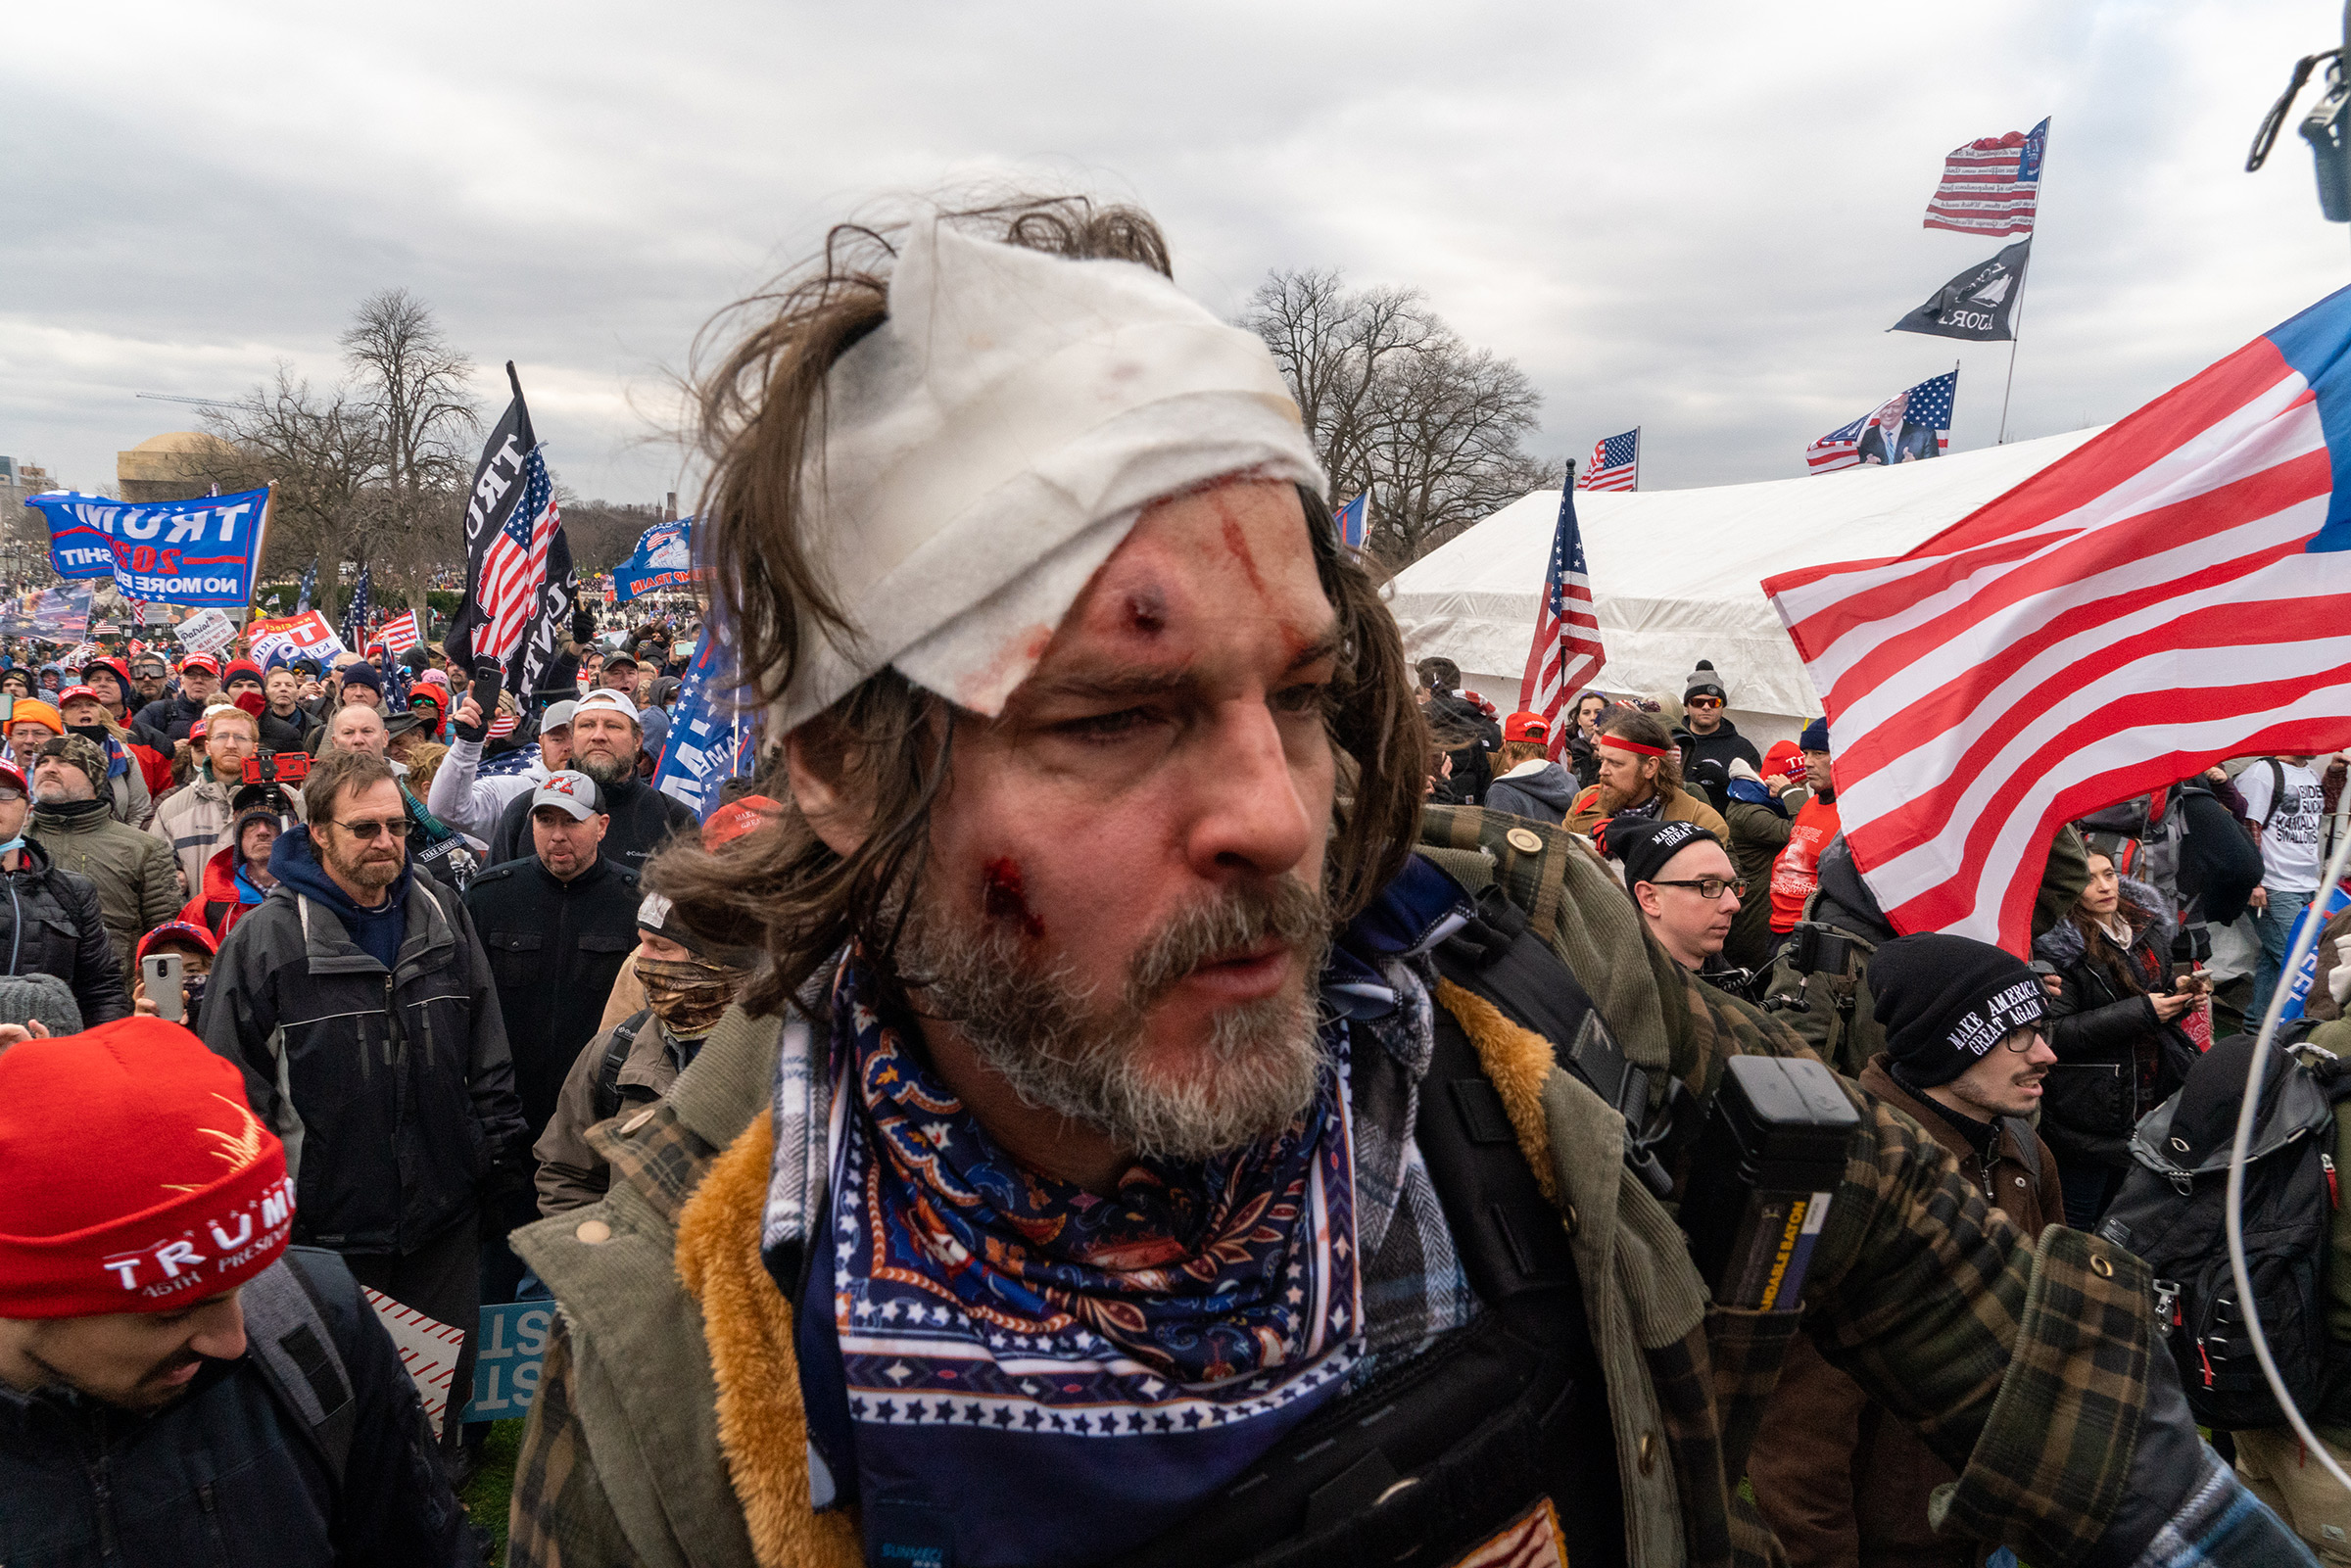 An injured pro-Trump supporter outside the Capitol building after clashes with police and security forces in Washington D.C., on Jan. 6.